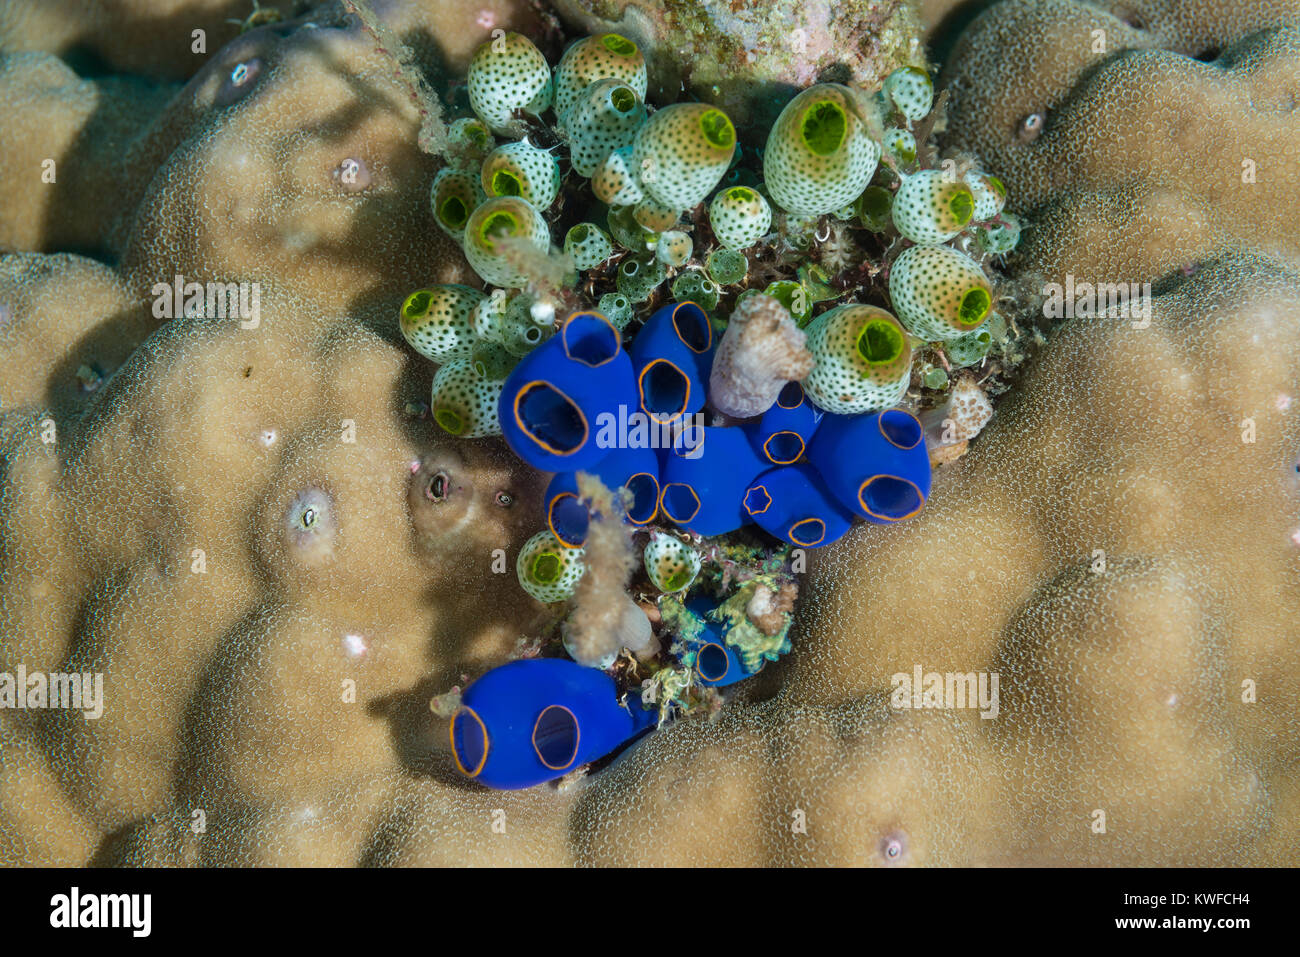 Blue tunicates on a coral Stock Photo